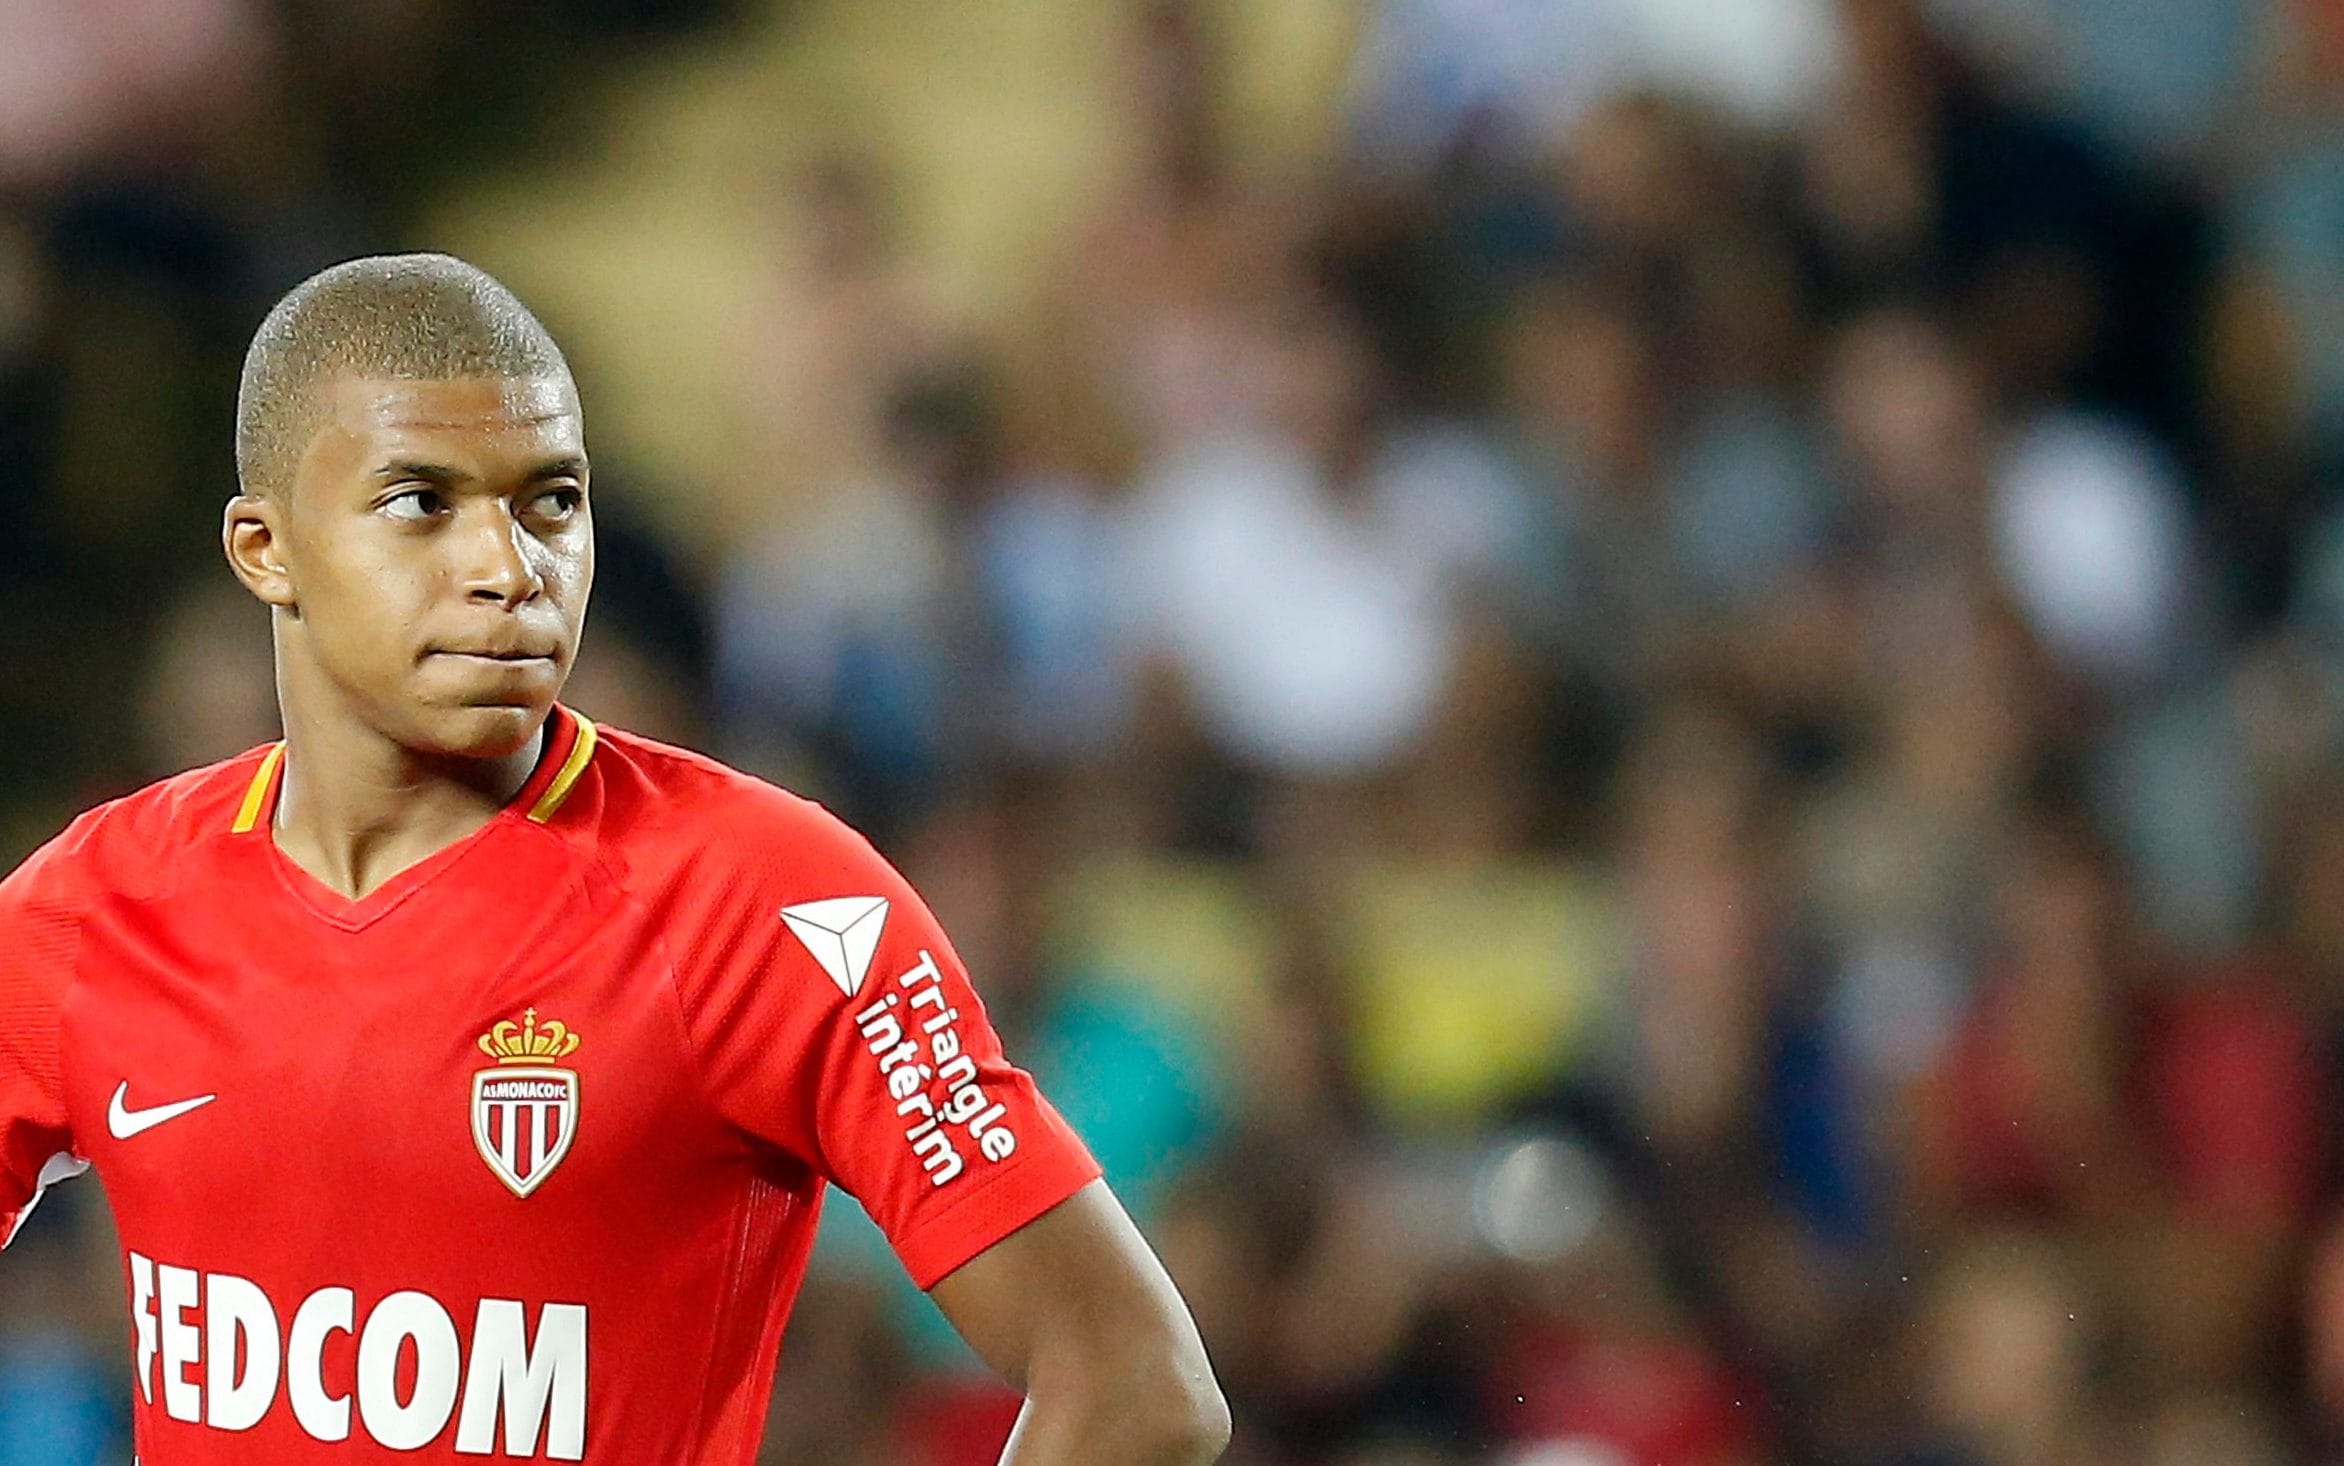 Agent reveals Barca had a chance to sign Mbappe in 2017 but opted out for Dembele